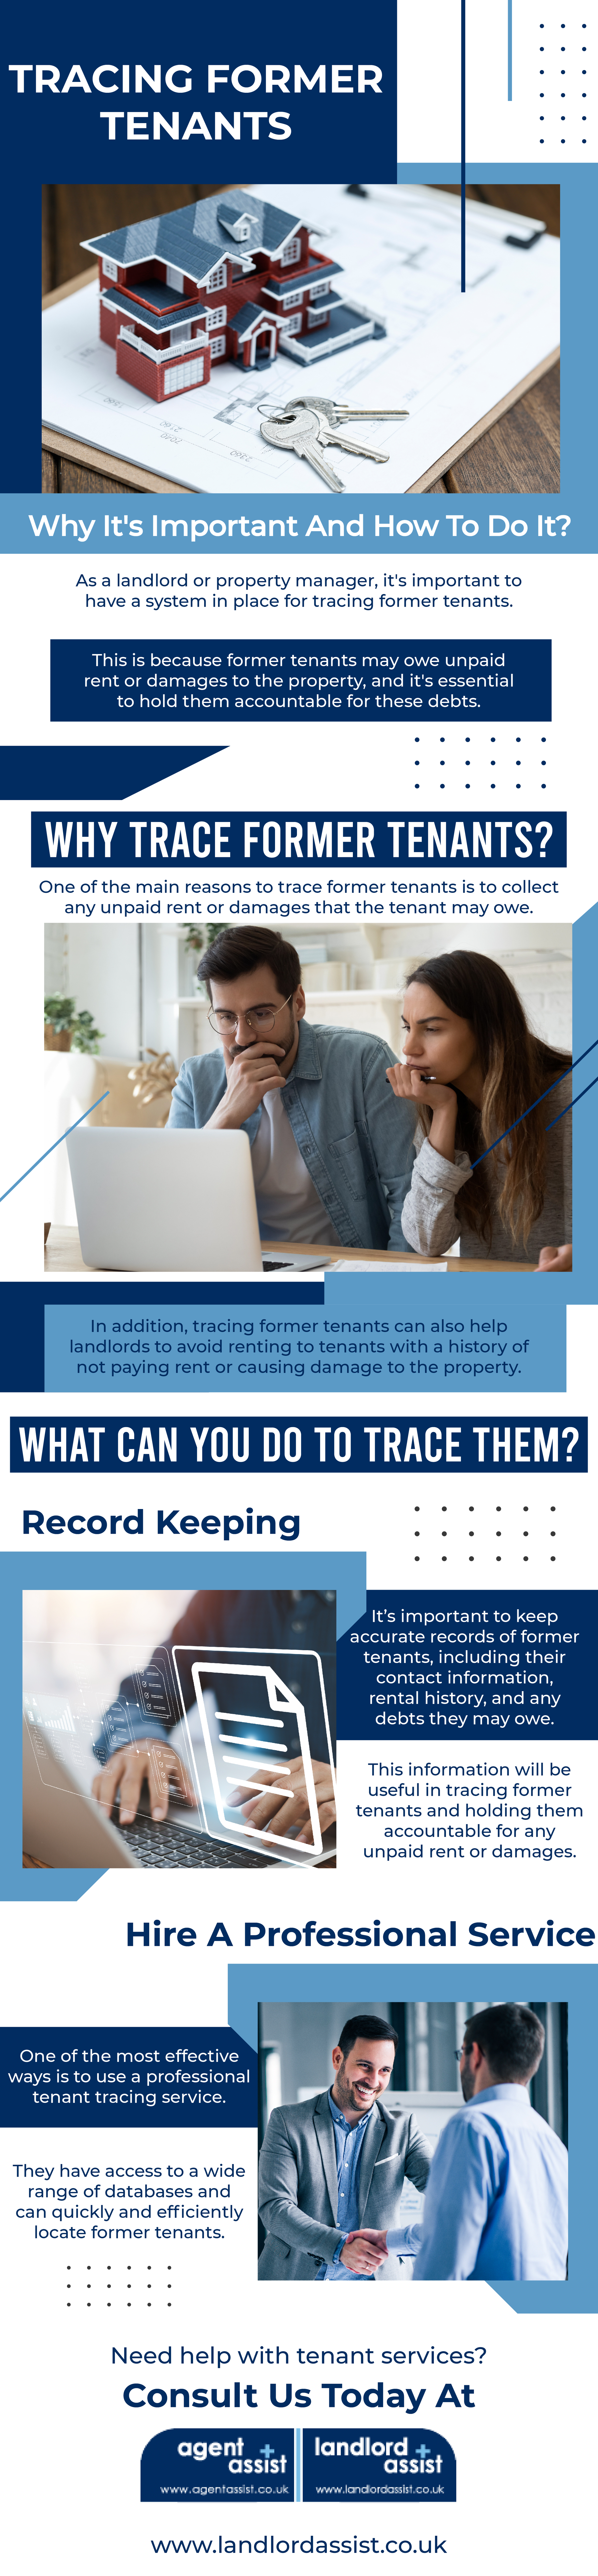 Tracing Former Tenants - Infograph